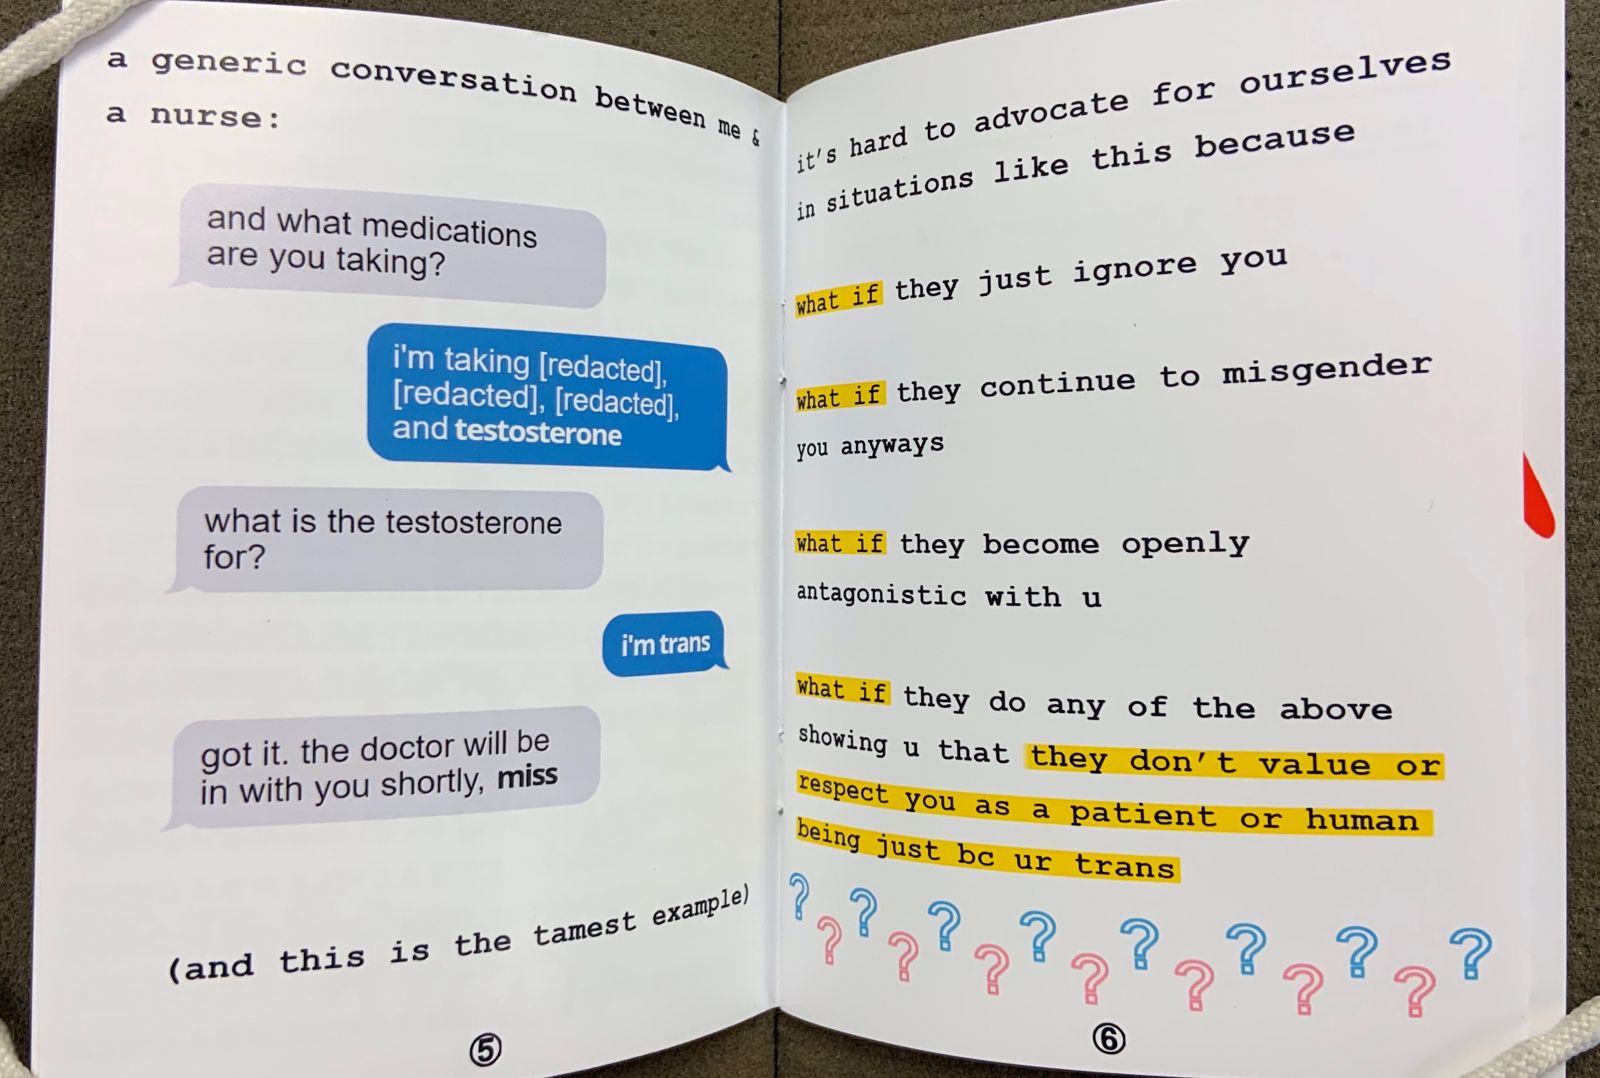 Two-page spread from Transgender Healthcare Blues, spotlighting biases in the healthcare industry when it comes to trans health. The left page recreates a text conversation in which a nurse misgenders the recipient even after they state they're trans. The right page details worries and fears that manifest in the writer's mind when it comes to receiving healthcare as a trans patient.